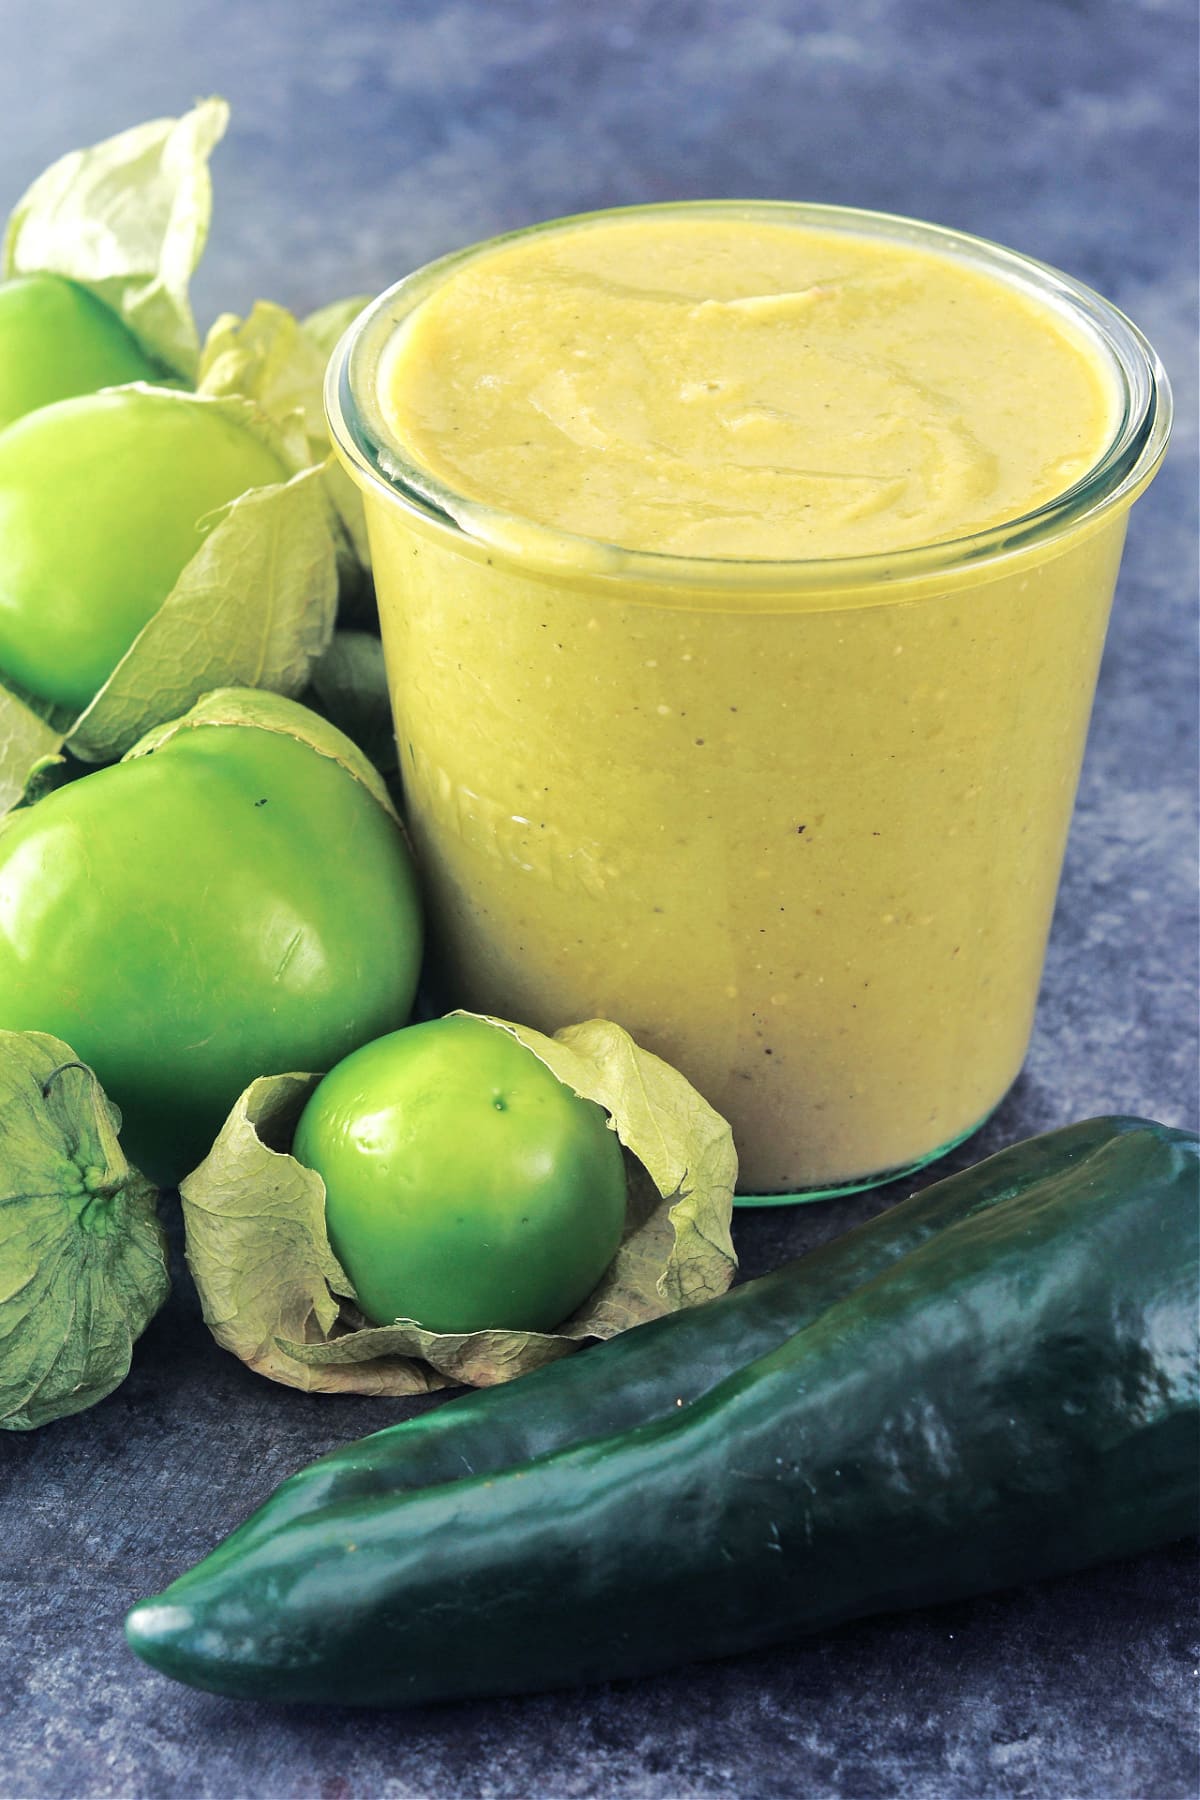 Homemade green enchilada sauce in a glass canning jar, surrounded by whole fresh tomatillos and peppers.